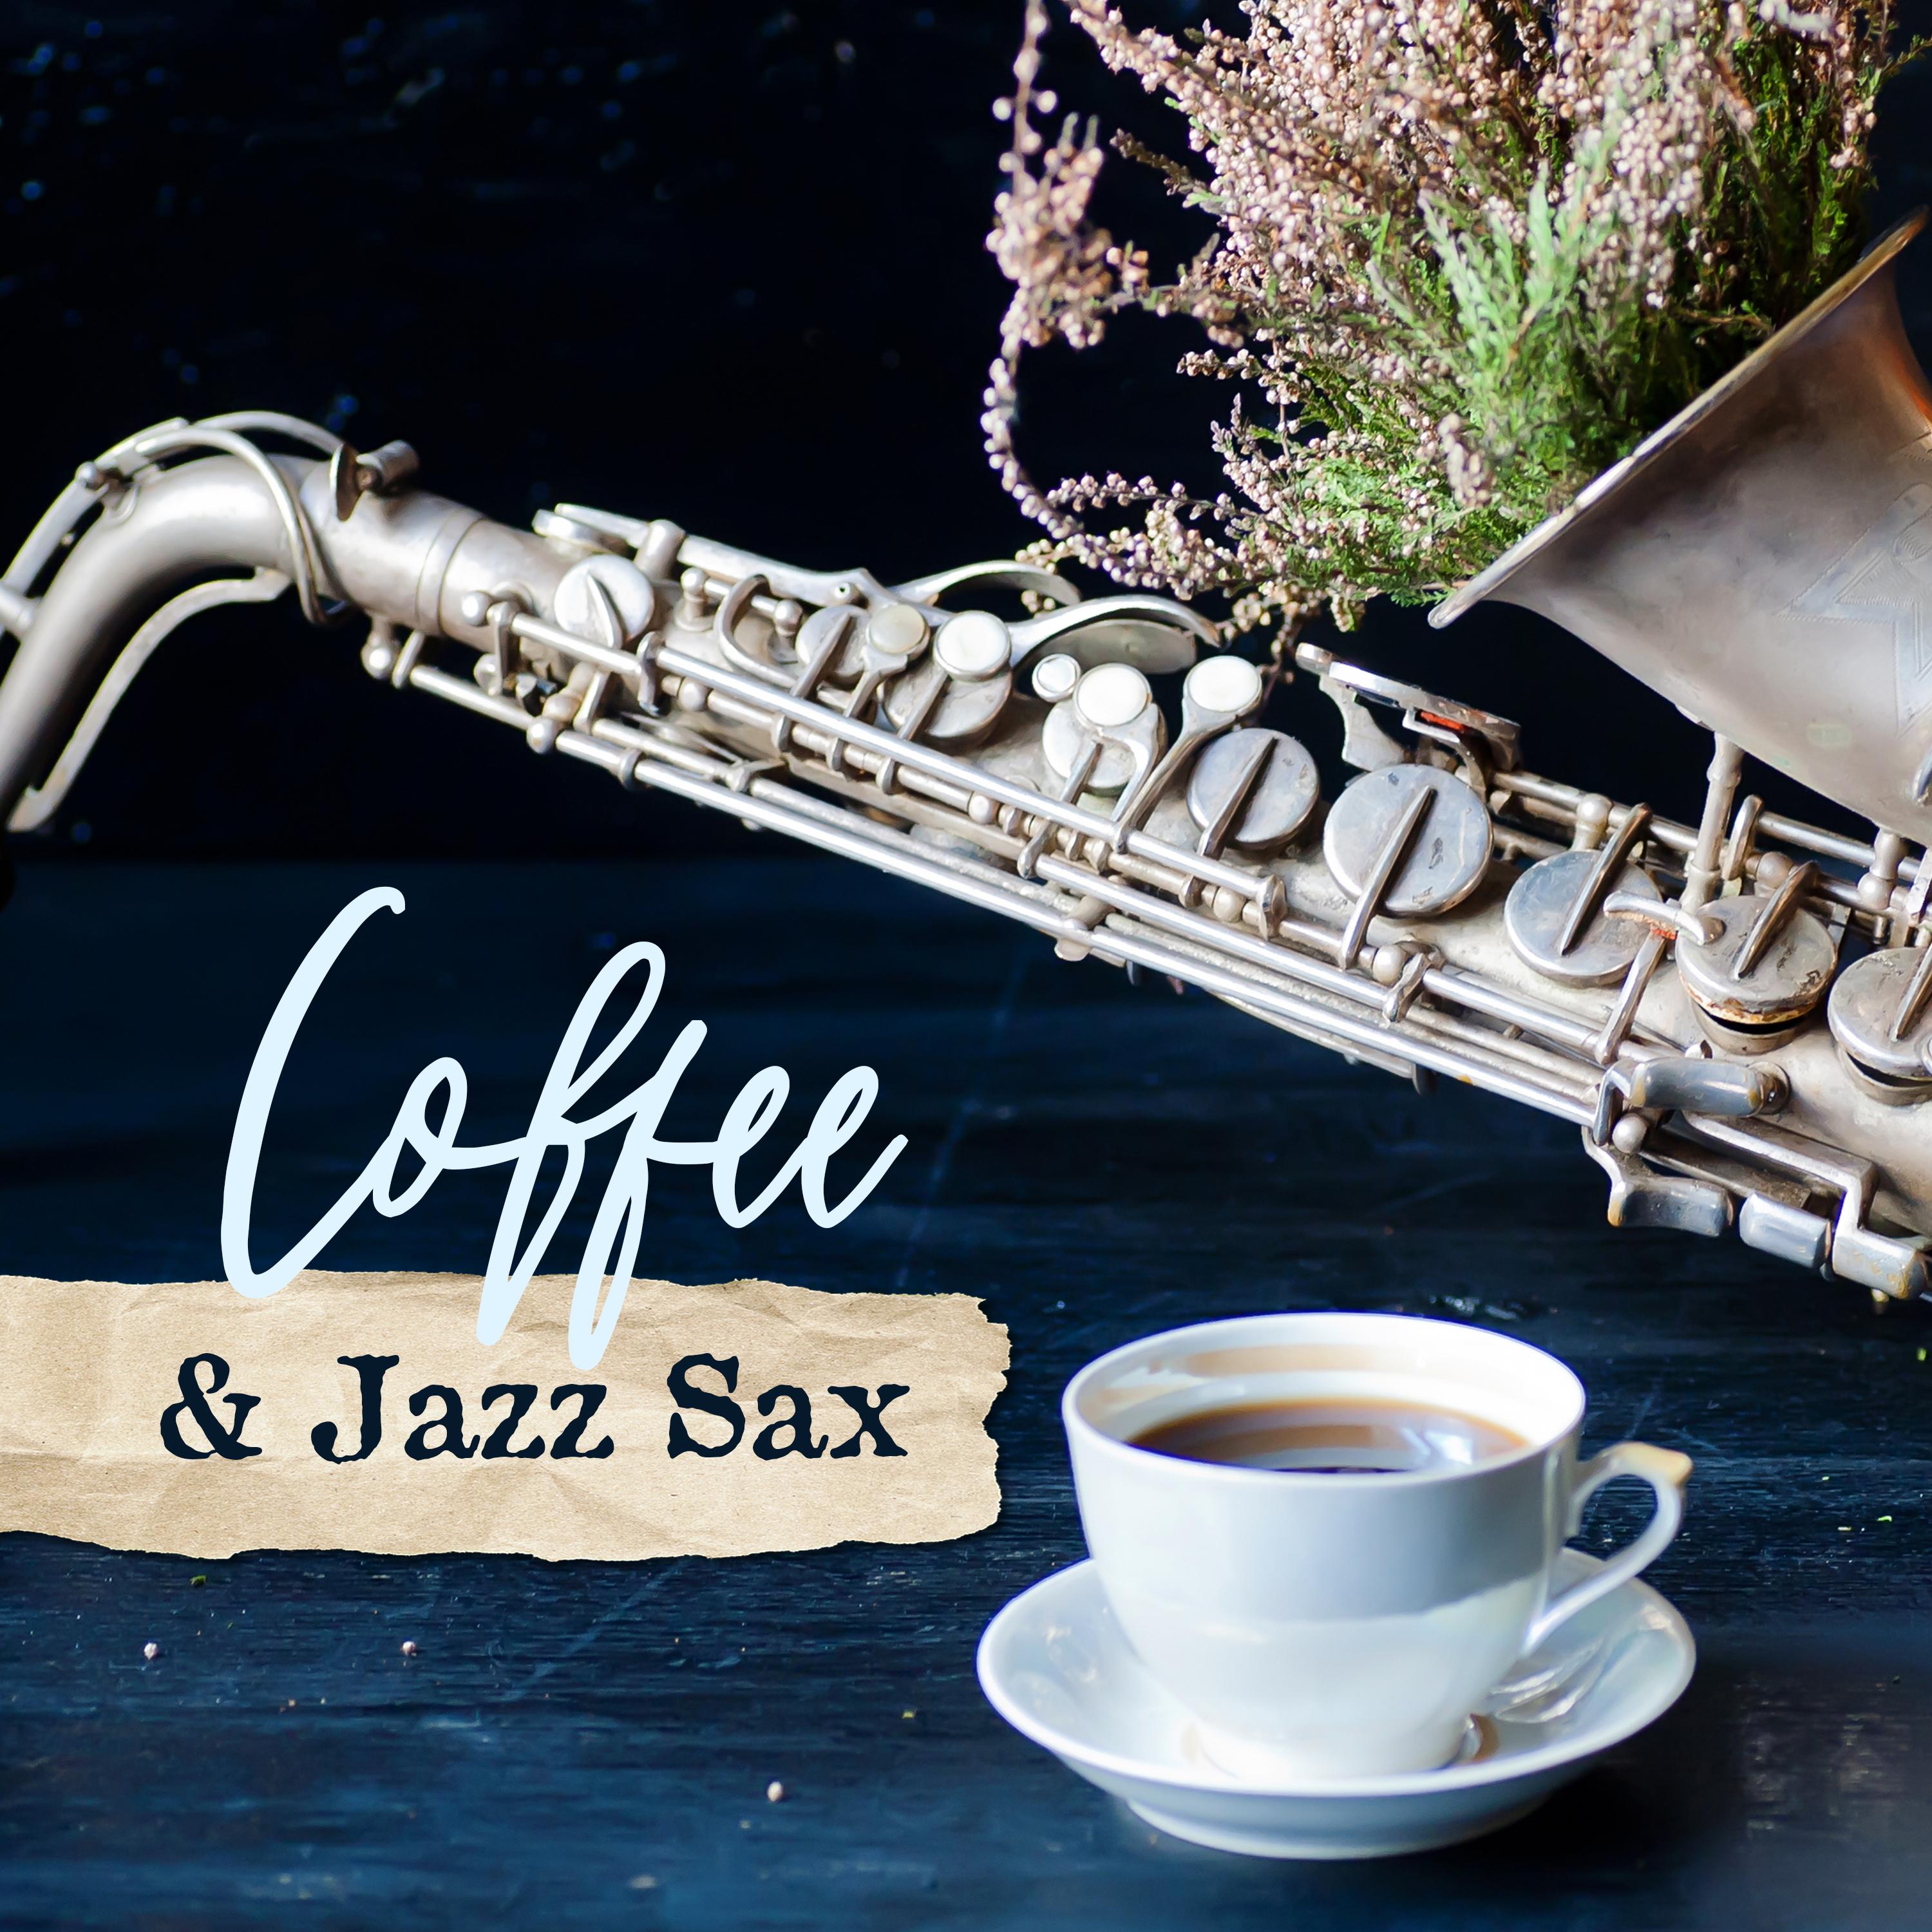 Coffee & Jazz Sax – Smooth Jazz 2019 Music Compilation, Background Melodies for Time Spending with Coffee & Friends, Magic Sounds of Sax, Piano & Others